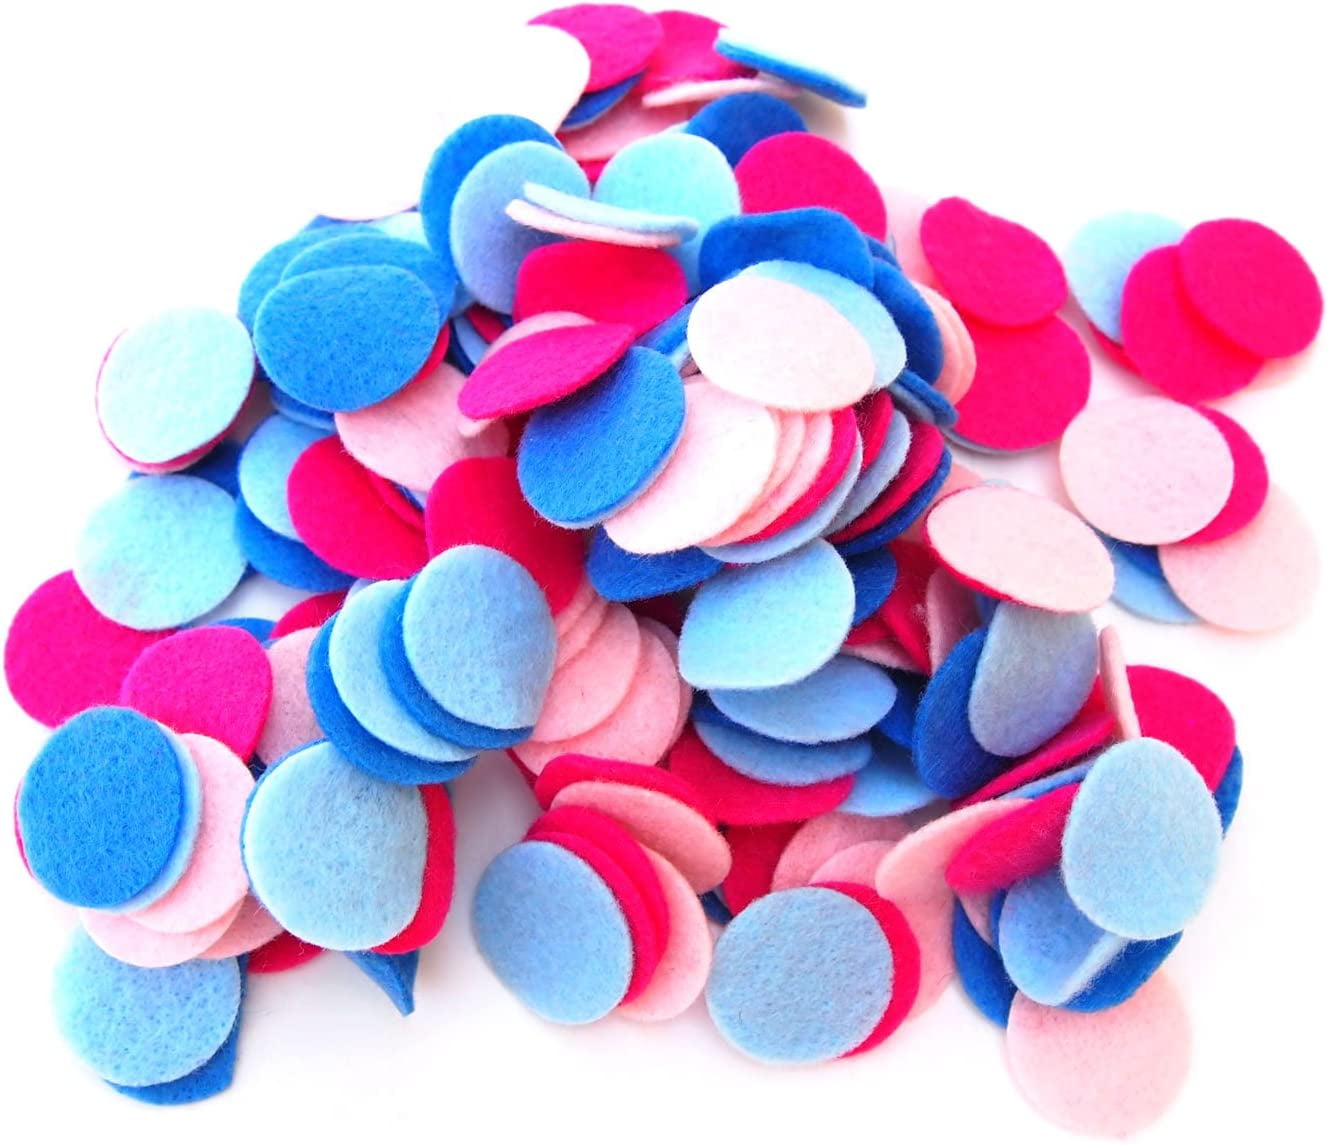 Playfully Ever After 4 inch Felt Hearts 16pc - Pink